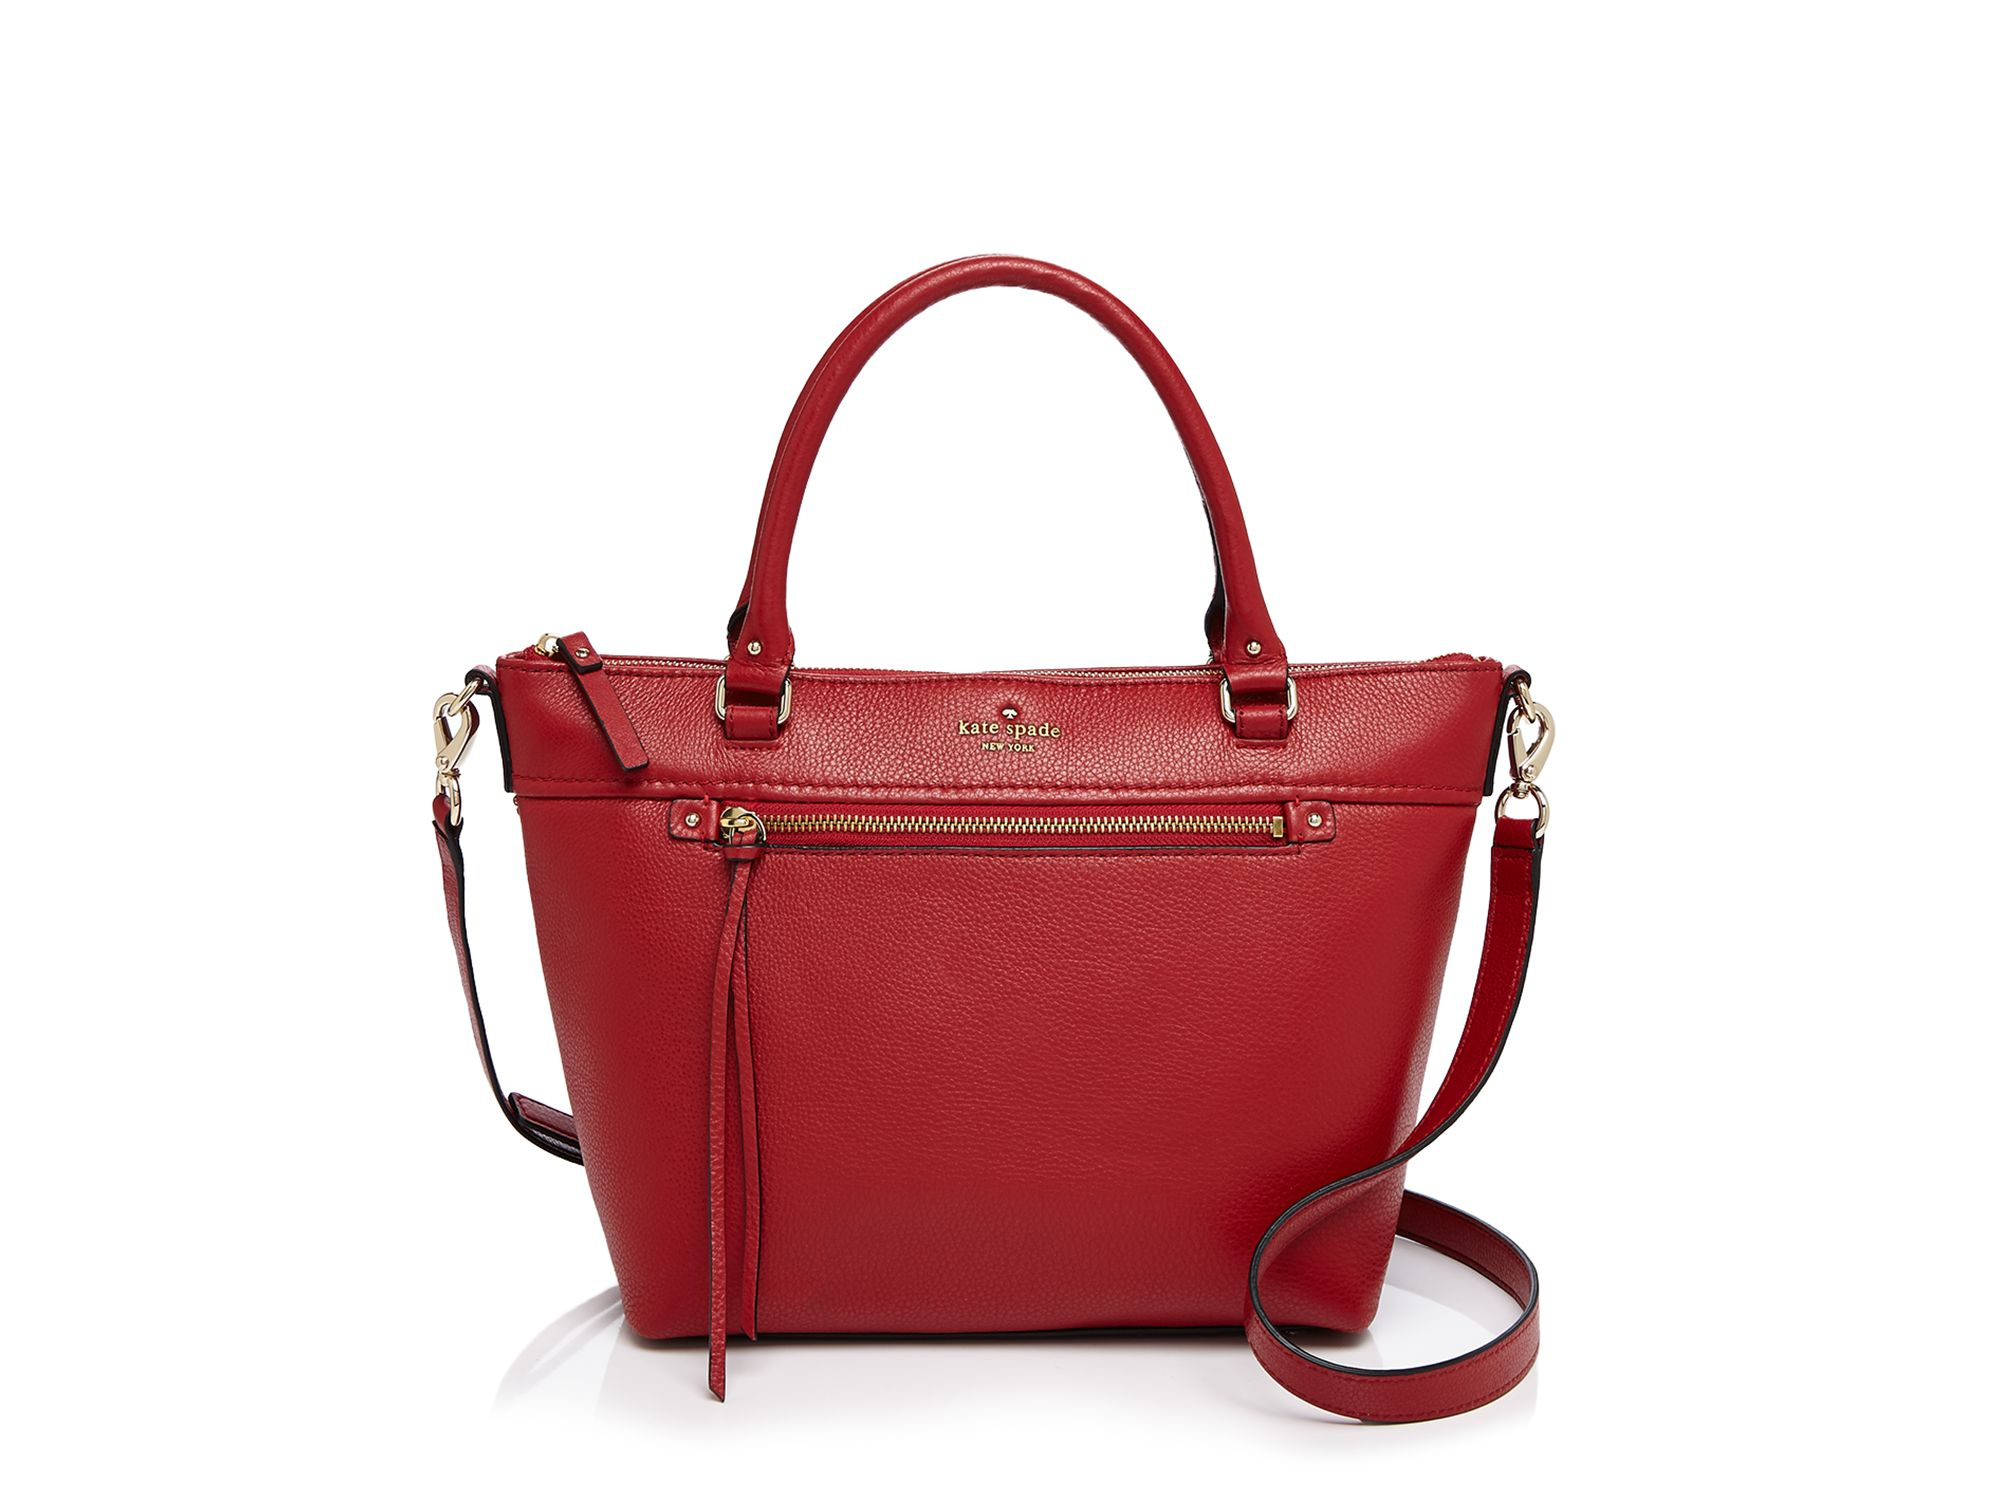 Kate spade Cobble Hill Small Gina Satchel in Red (Dynasty Red) | Lyst